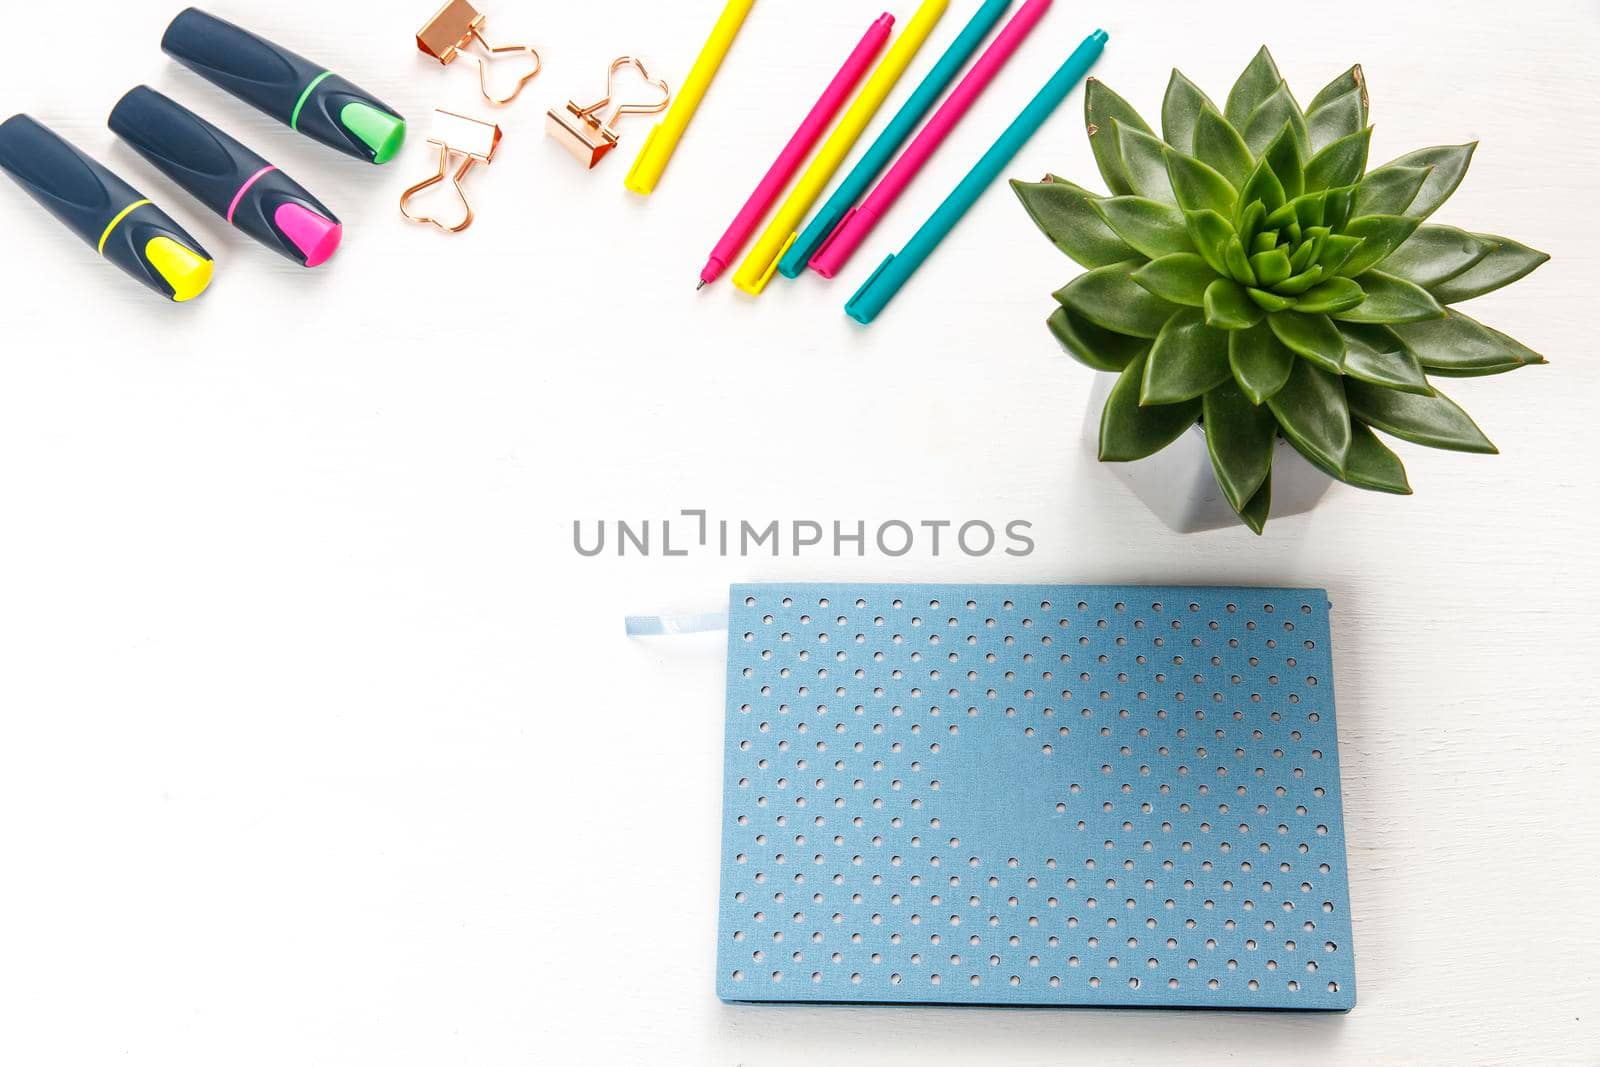 Layout for the office. Back to school. Blue notebook, colorful pens, felt-tip pens, paper clips, potted echeveria. Place for text